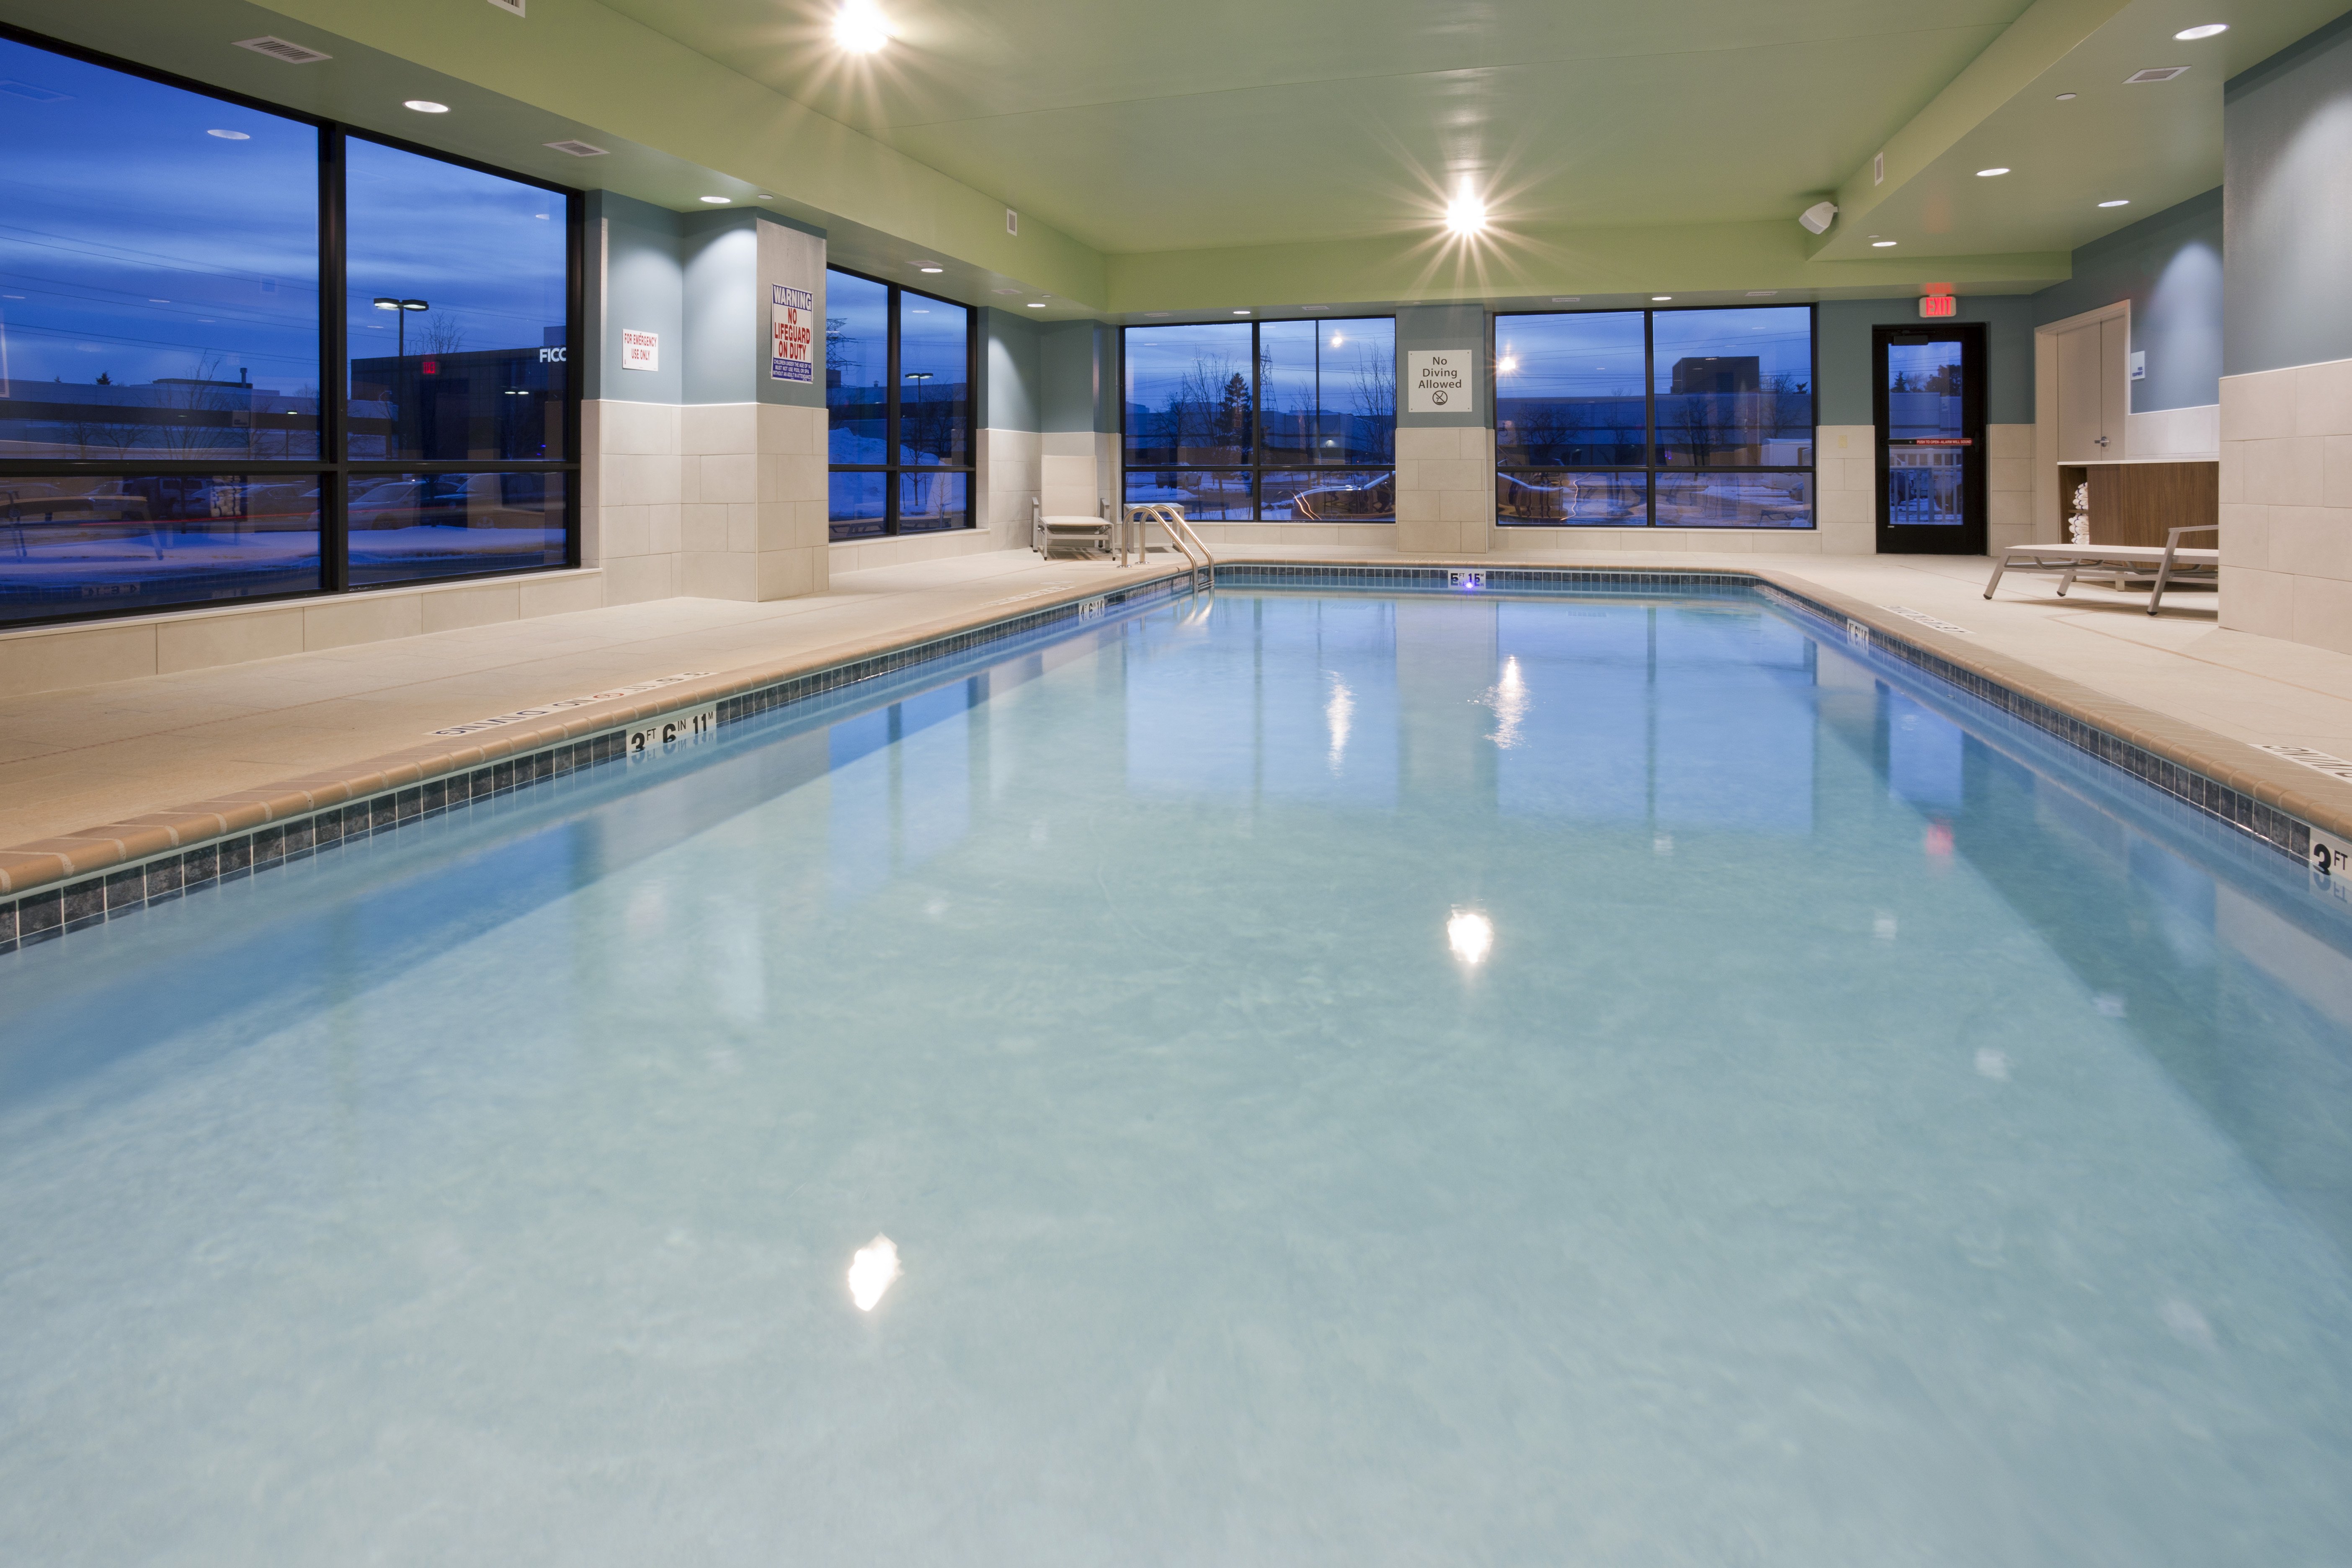 The Holiday Inn Express in Roseville, MN has a fun indoor pool!